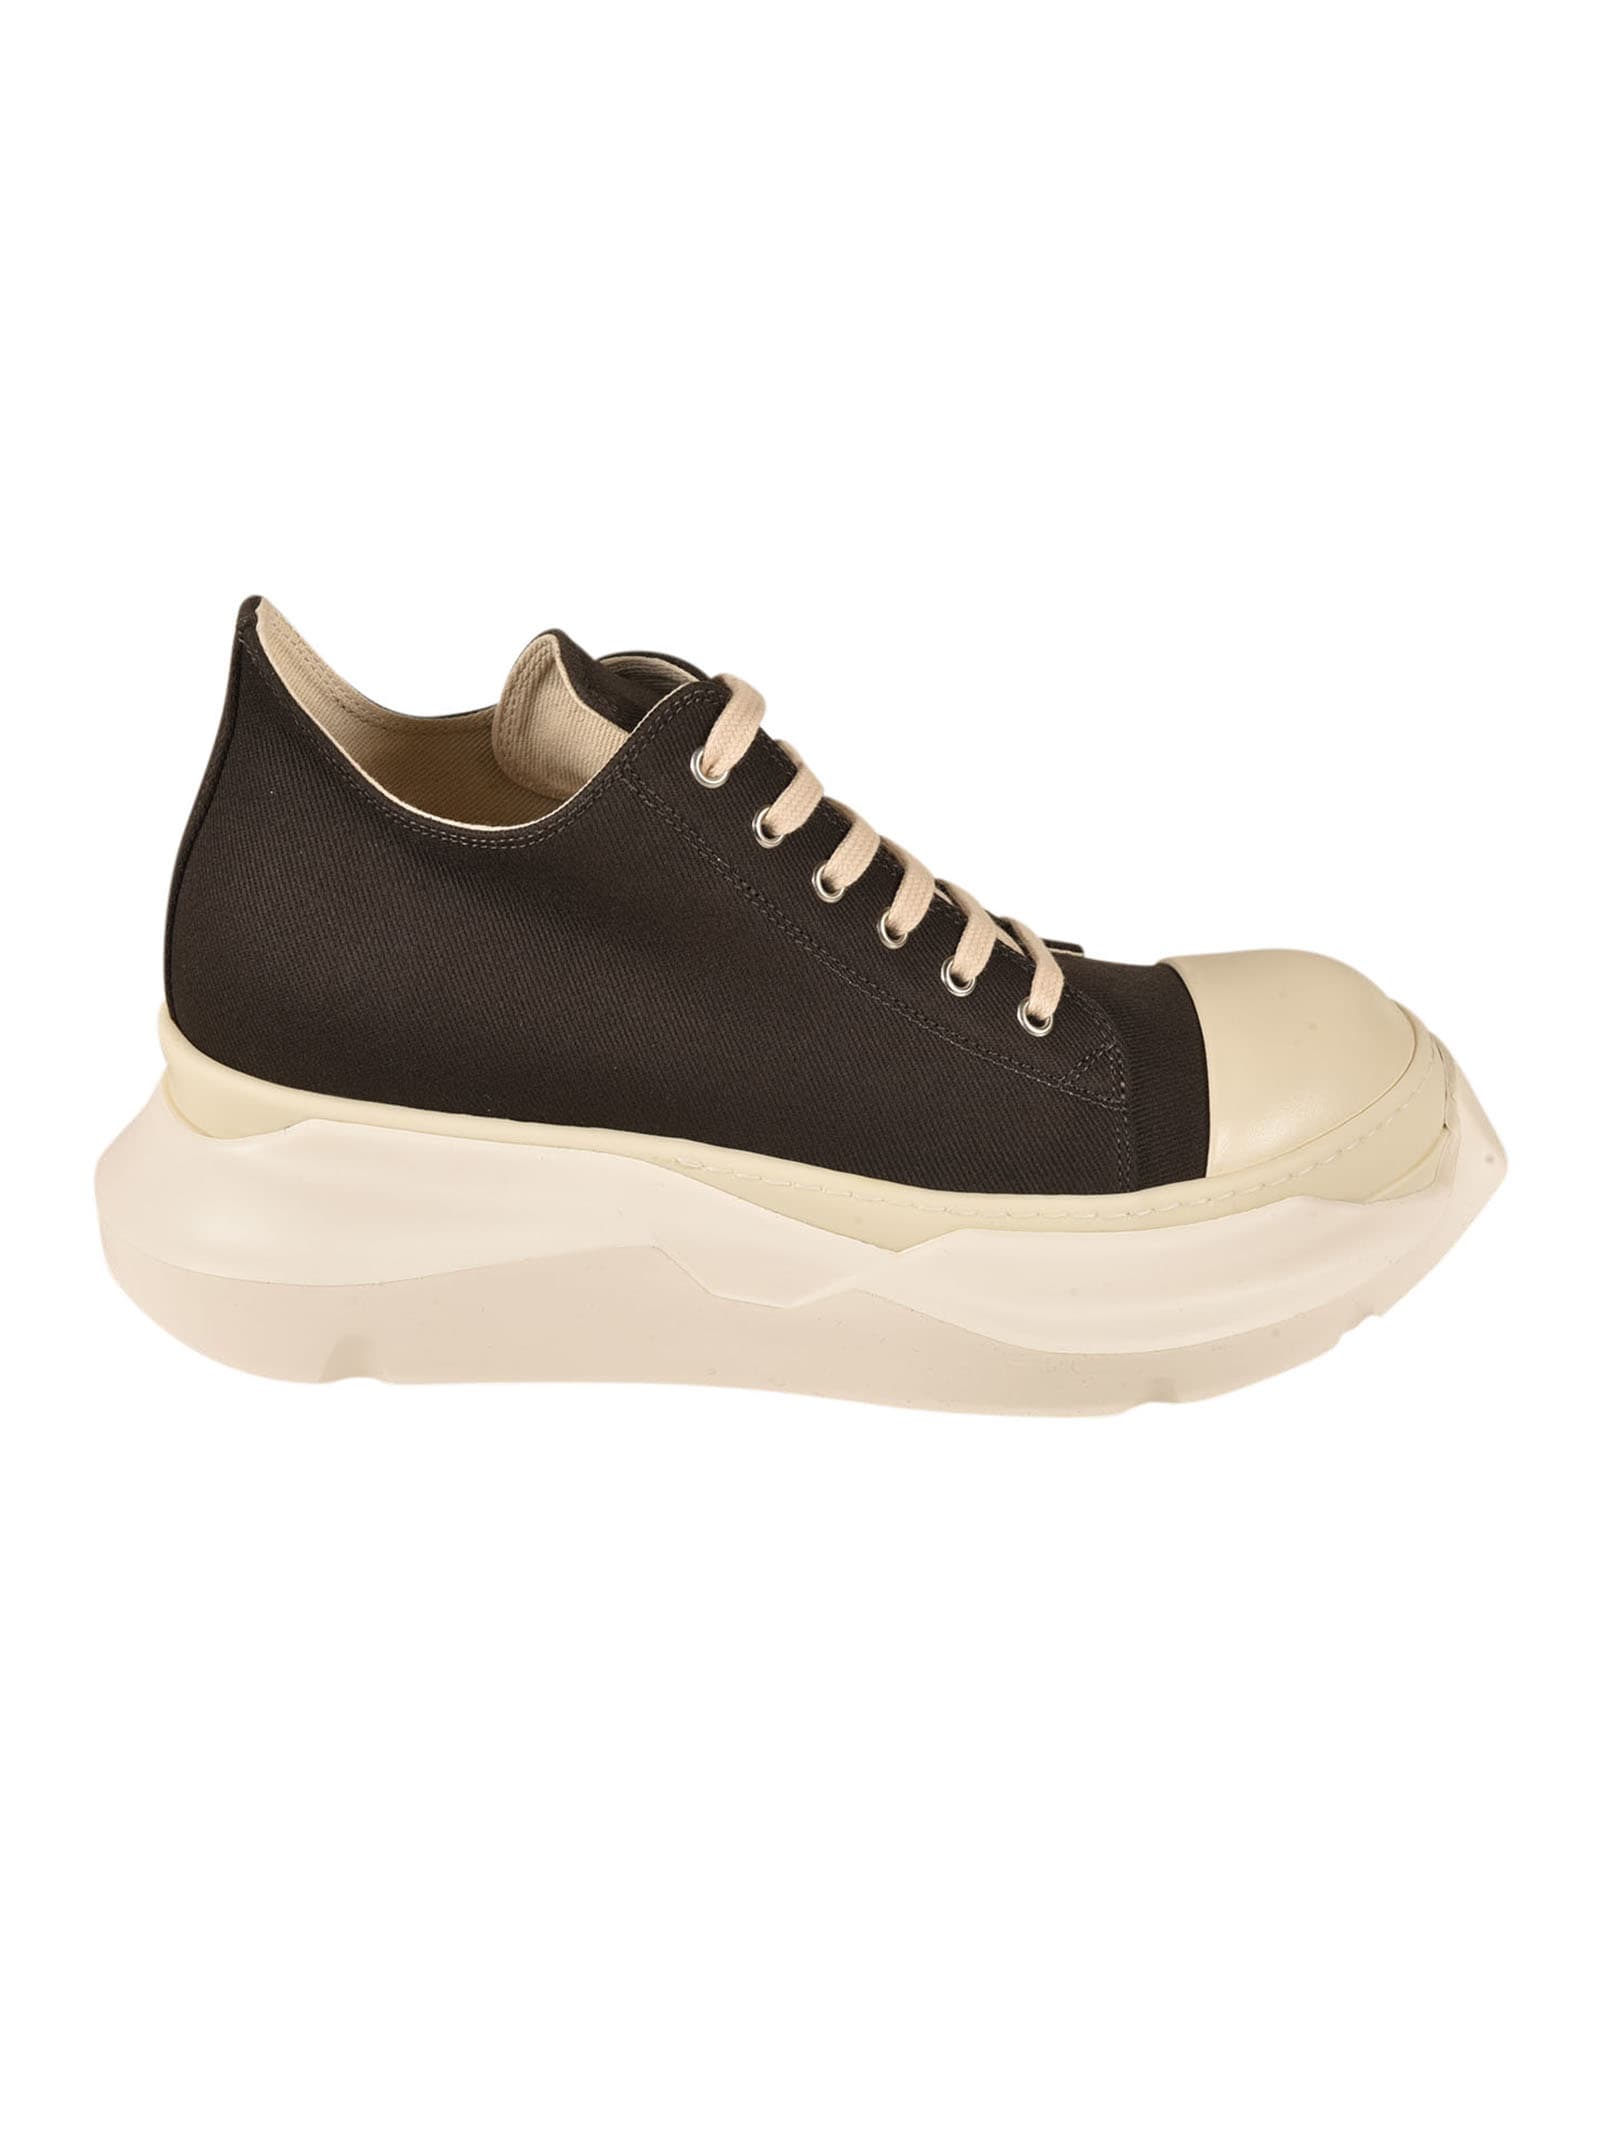 Rick Owens Abstract Low Sneakers